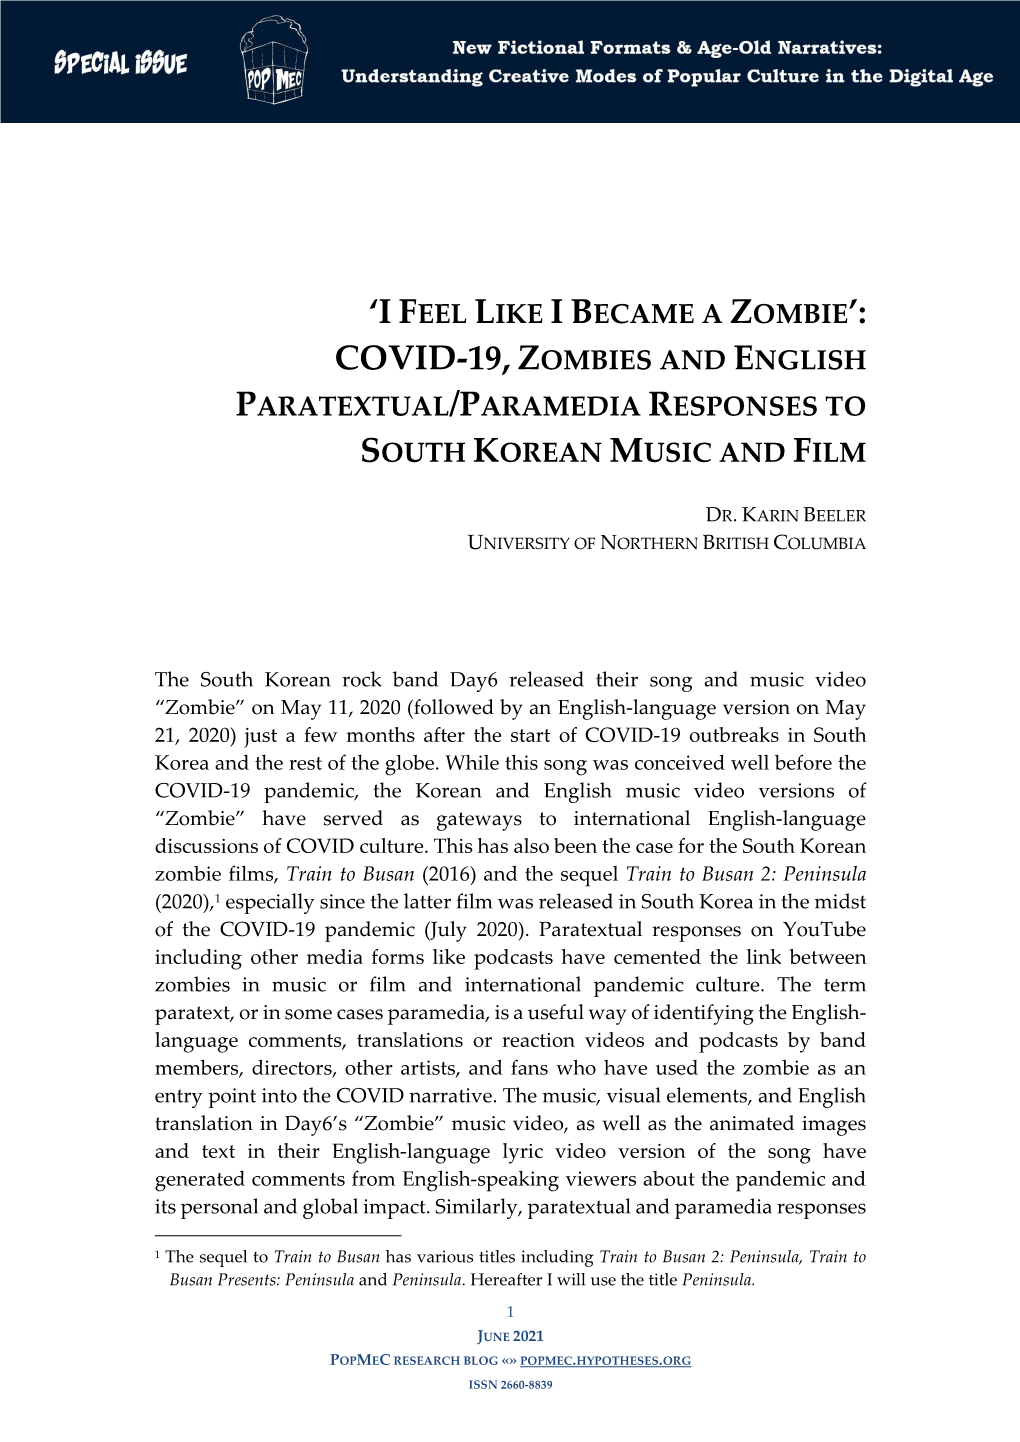 Covid-19, Zombies and English Paratextual/Paramedia Responses to South Korean Music and Film